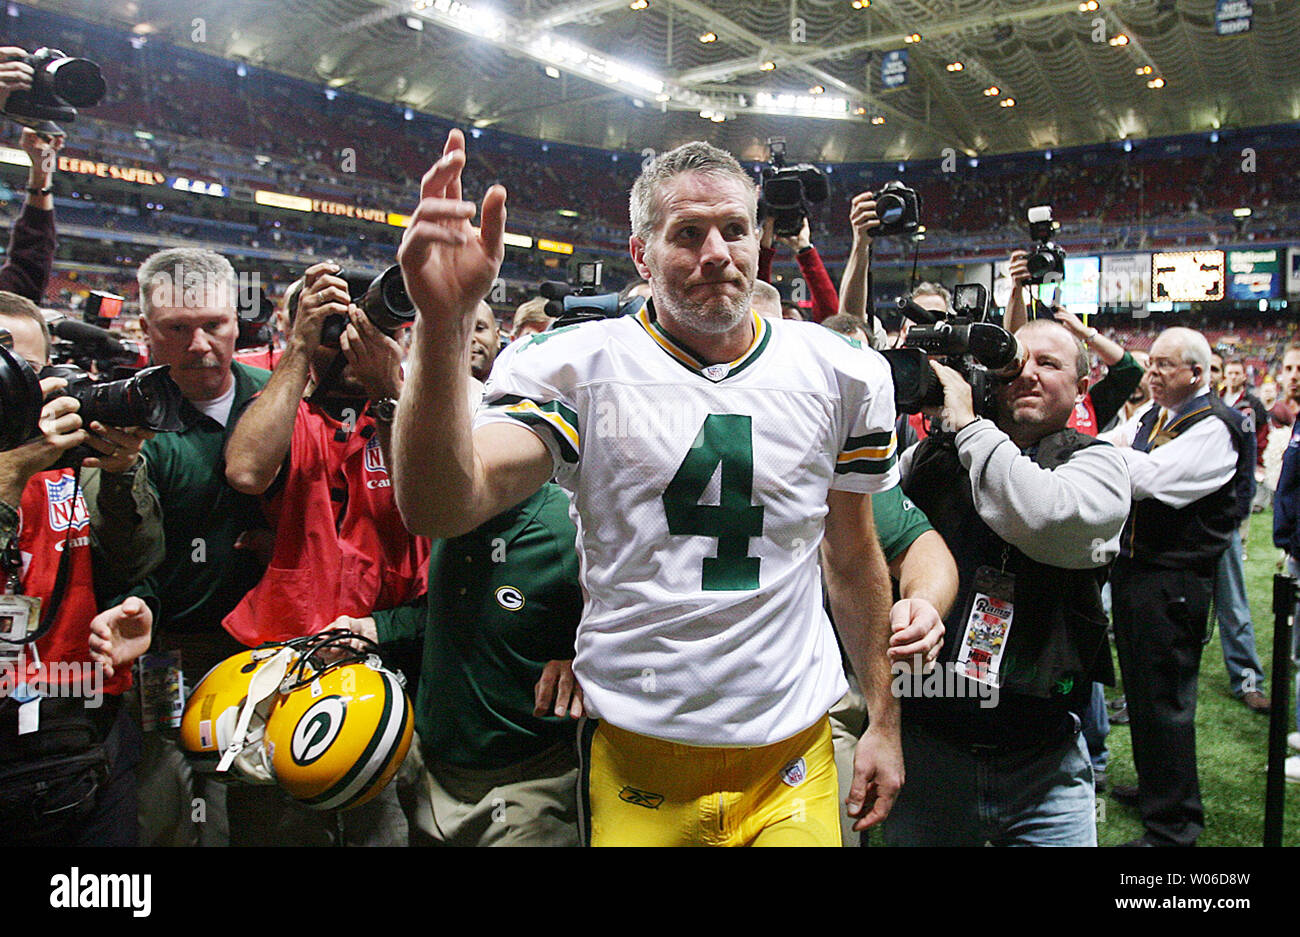 Green Bay Packers quarterback Brett Favre waves to the fans as he leaves the field after defeating the St. Louis Rams 33-14 at the Edward Jones Dome in St. Louis on December 16, 2007. Favre threw for 201 yards and two touchdowns, eclipsing Dan Marino to become the NFL career leader in yards passing. (UPI Photo/Bill Greenblatt) Stock Photo